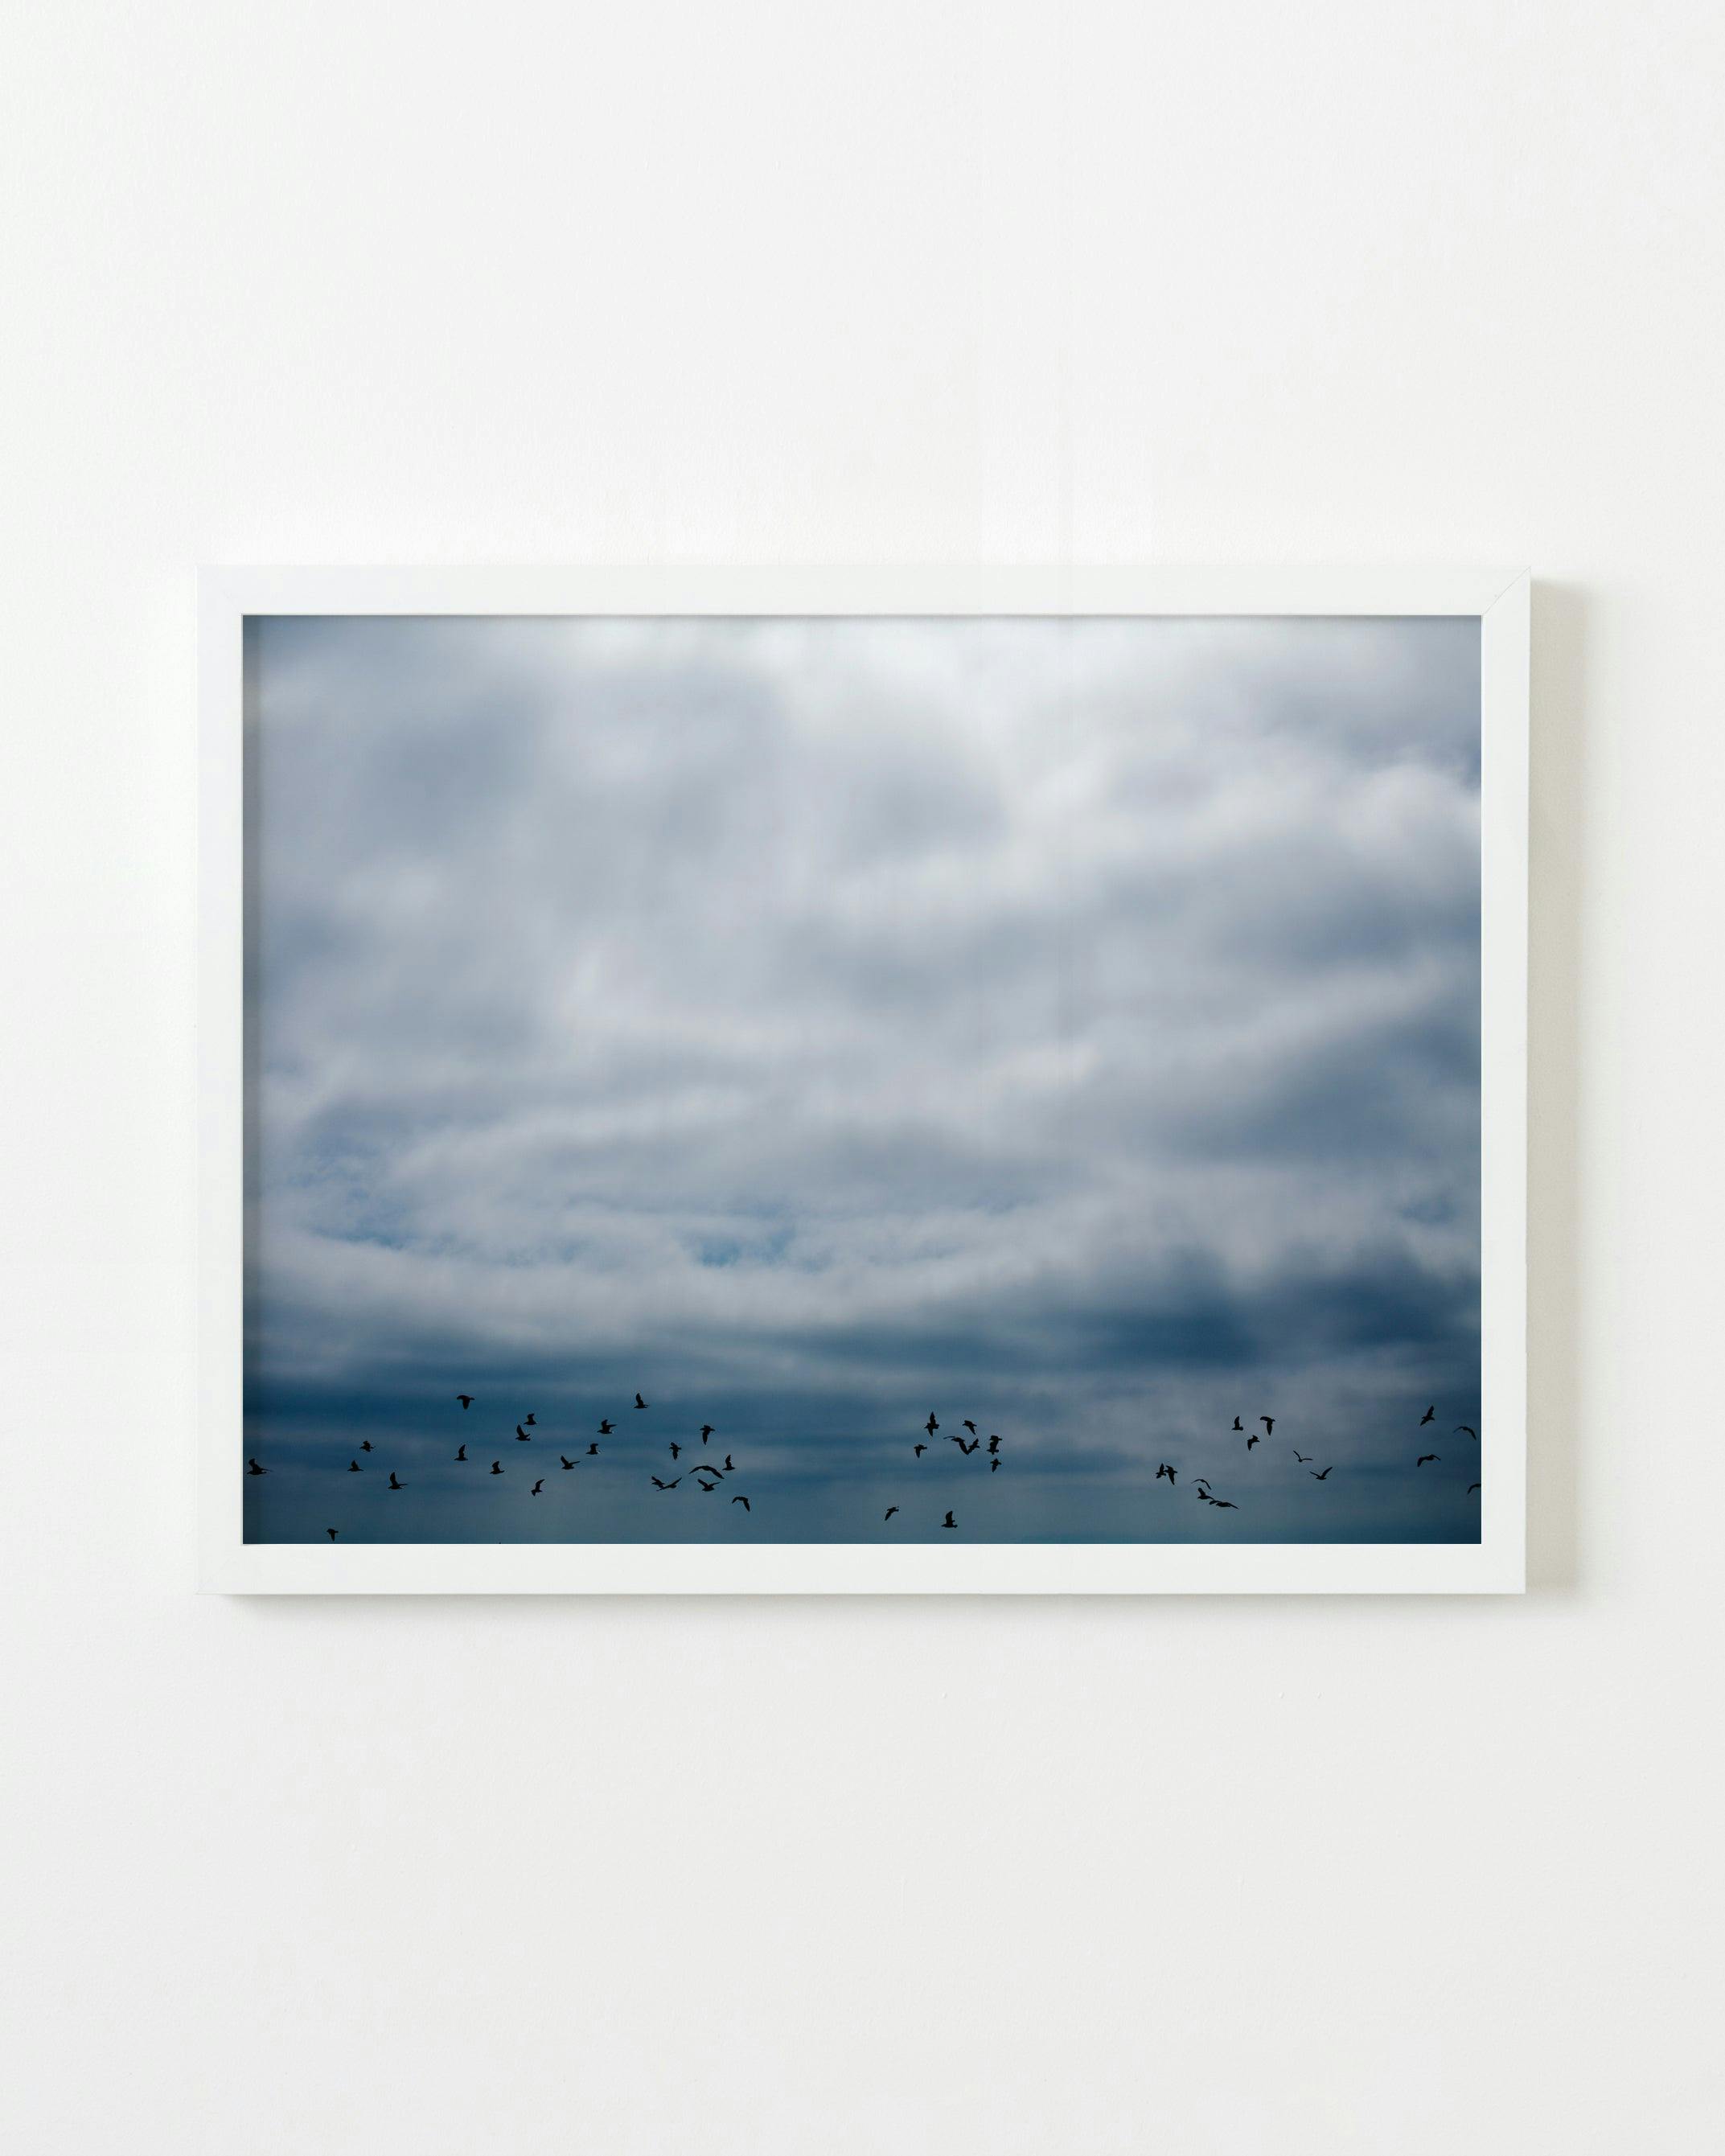 Photography by Jessica Haye & Clark Hsiao titled "Flock".